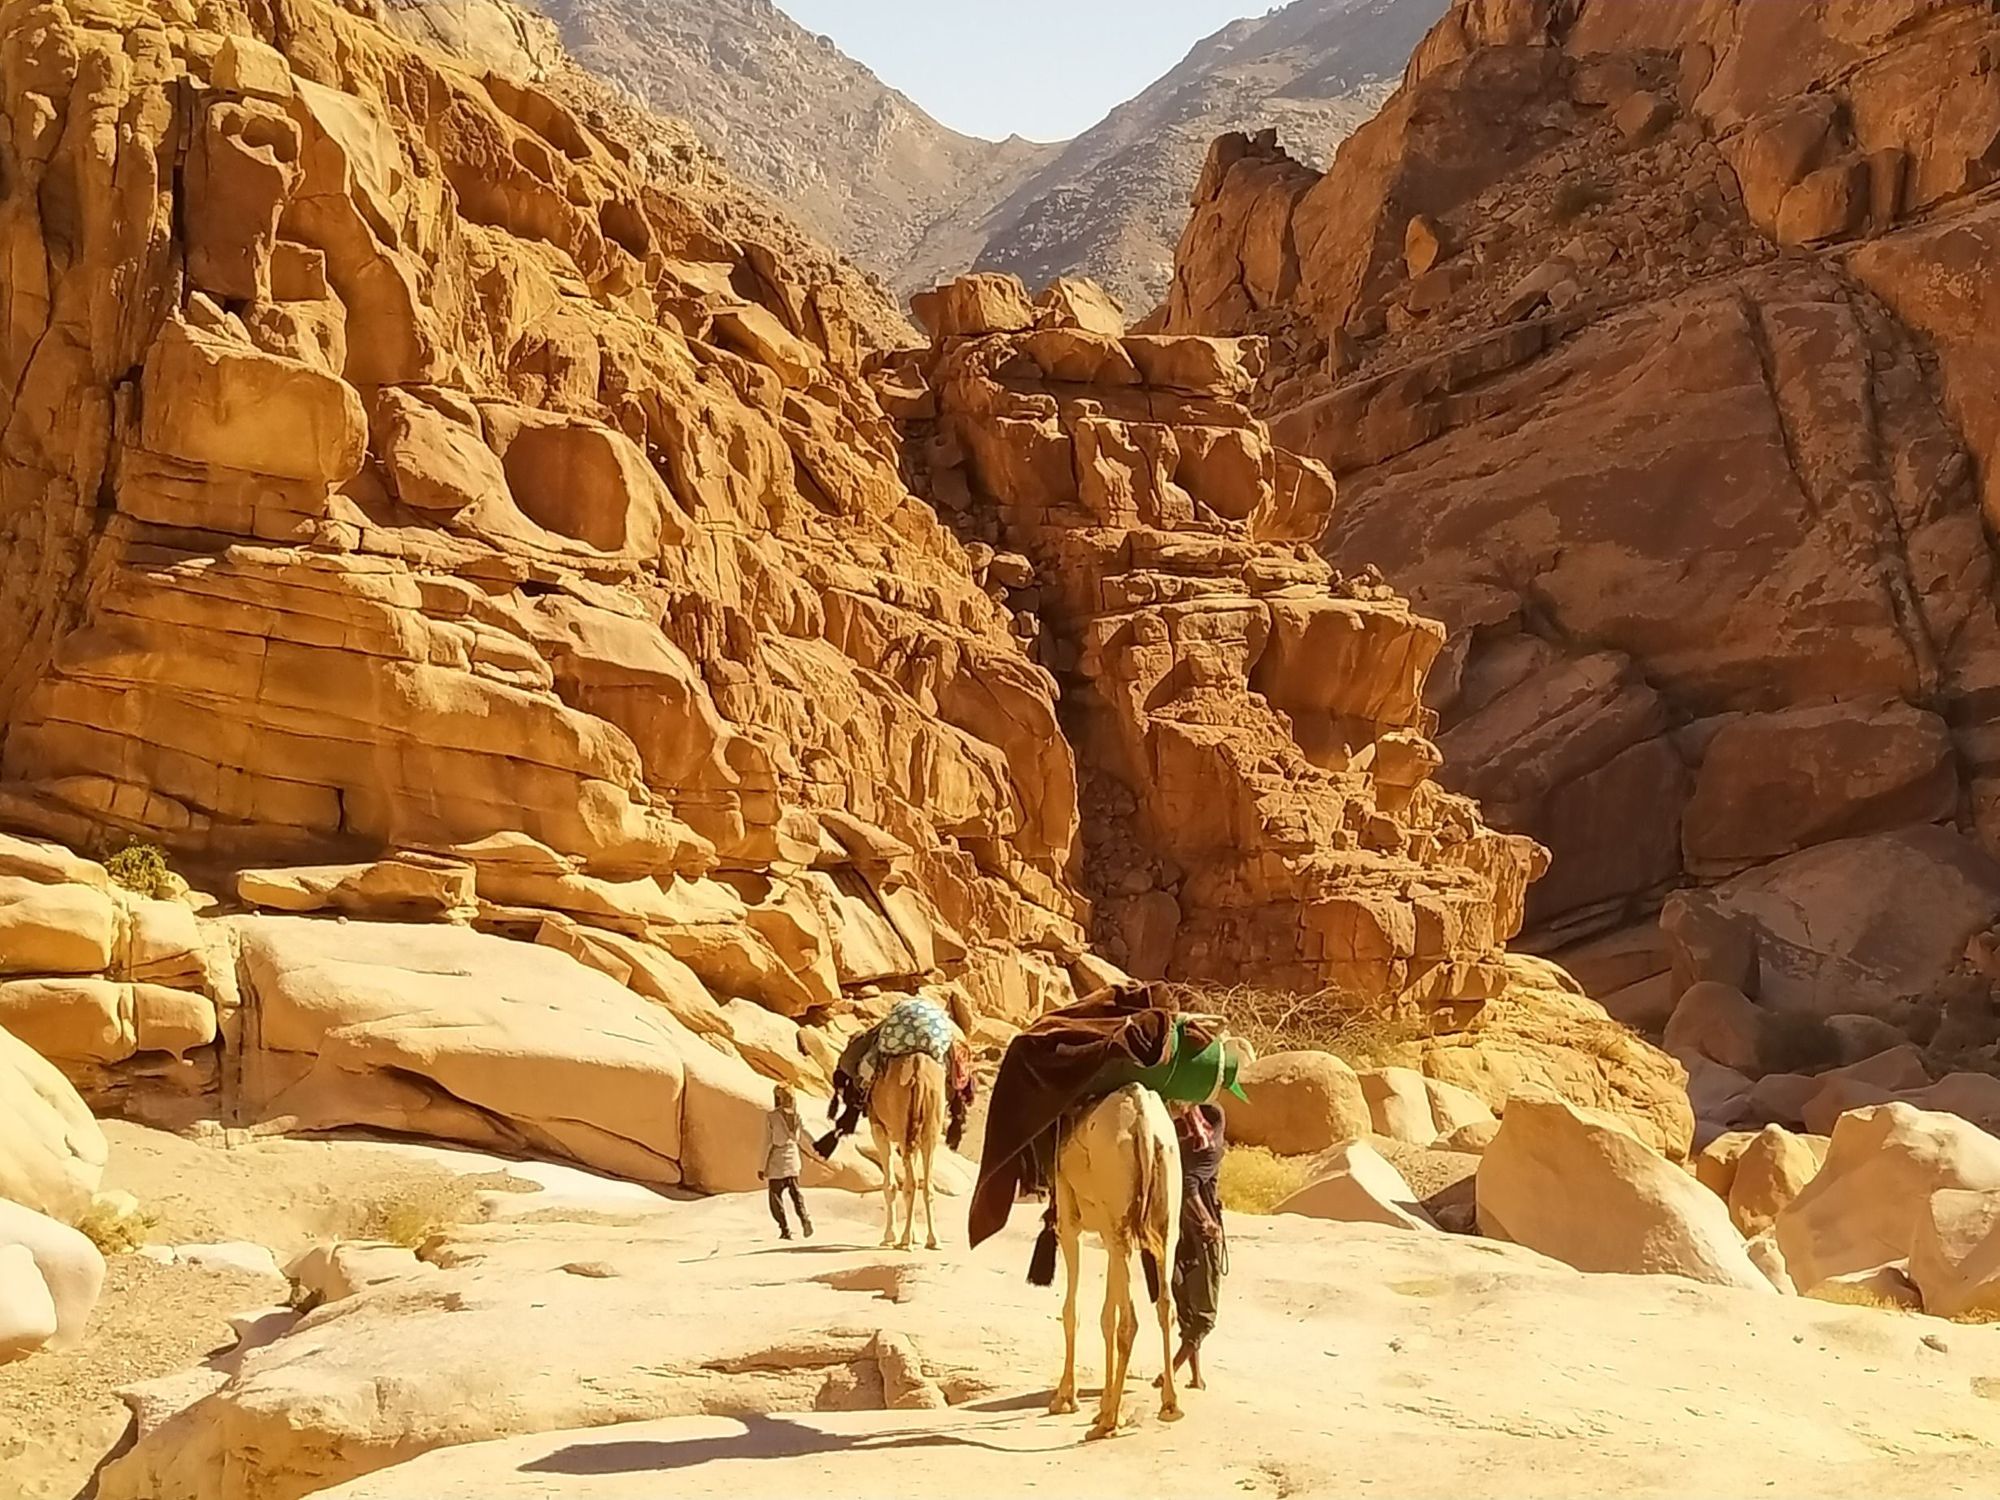 A Bedouin man leads two camels through the Sinai Desert.